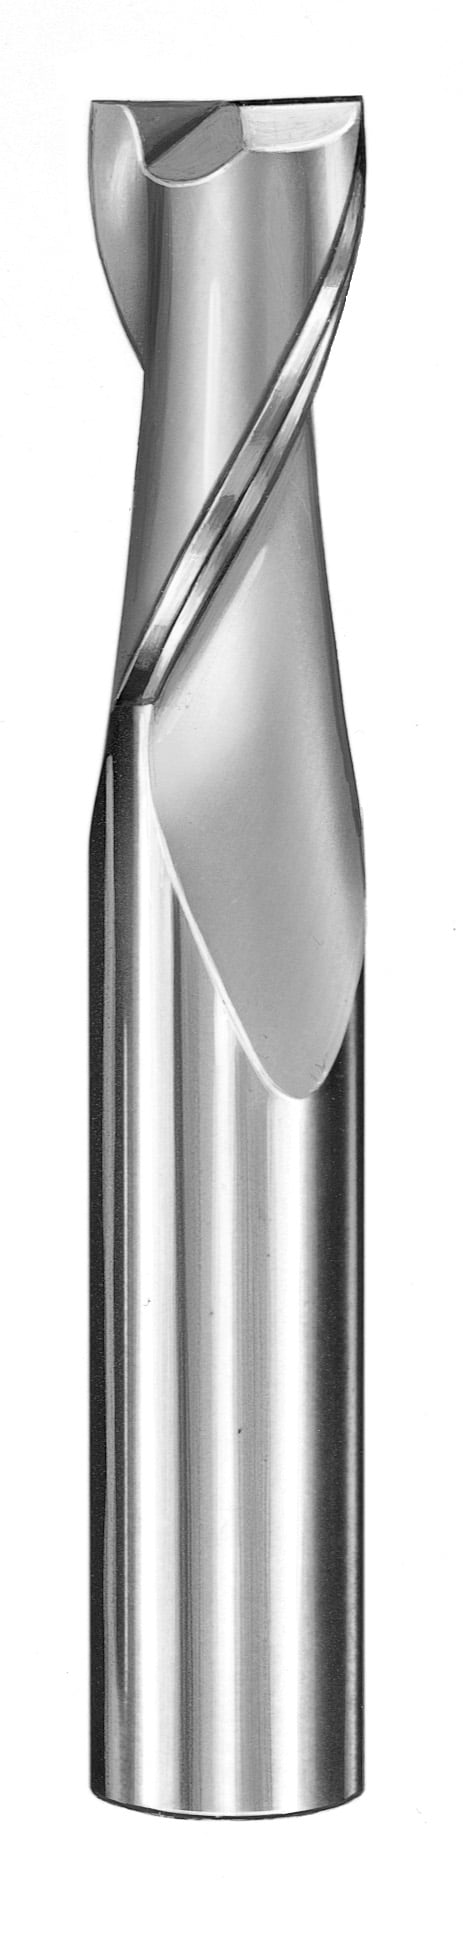 21/64" Dia, 2 Flute, Square End End Mill - 30341